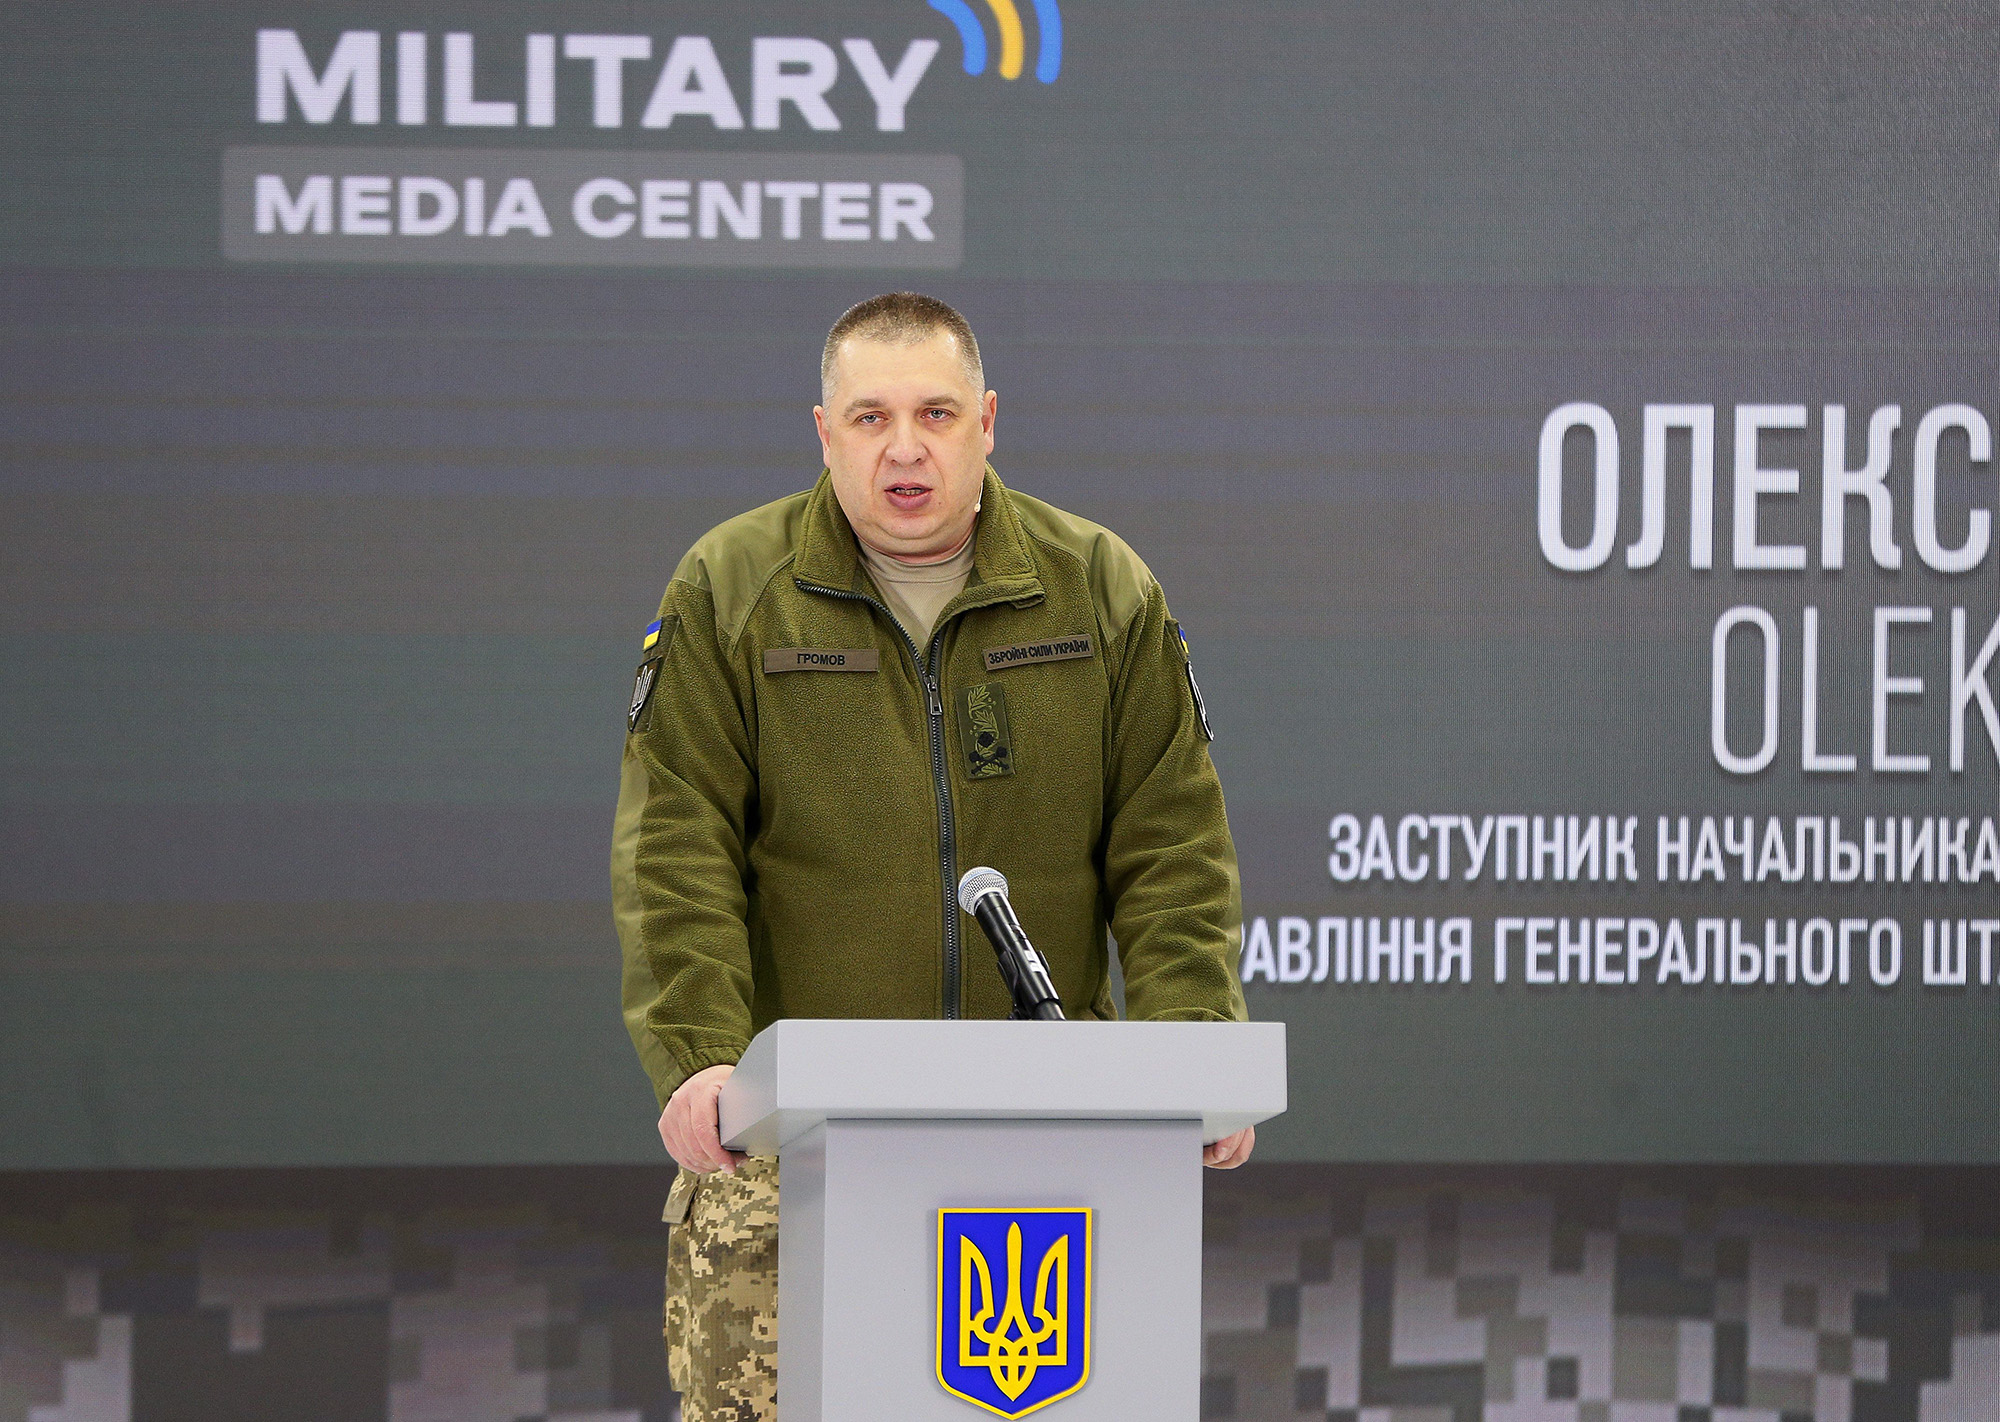 Oleksii Hromov, Deputy Head of the Main Operations Directorate of the General Staff of the Armed Forces of Ukraine addresses during a media briefing in Kyiv, Ukraine, on January 12.